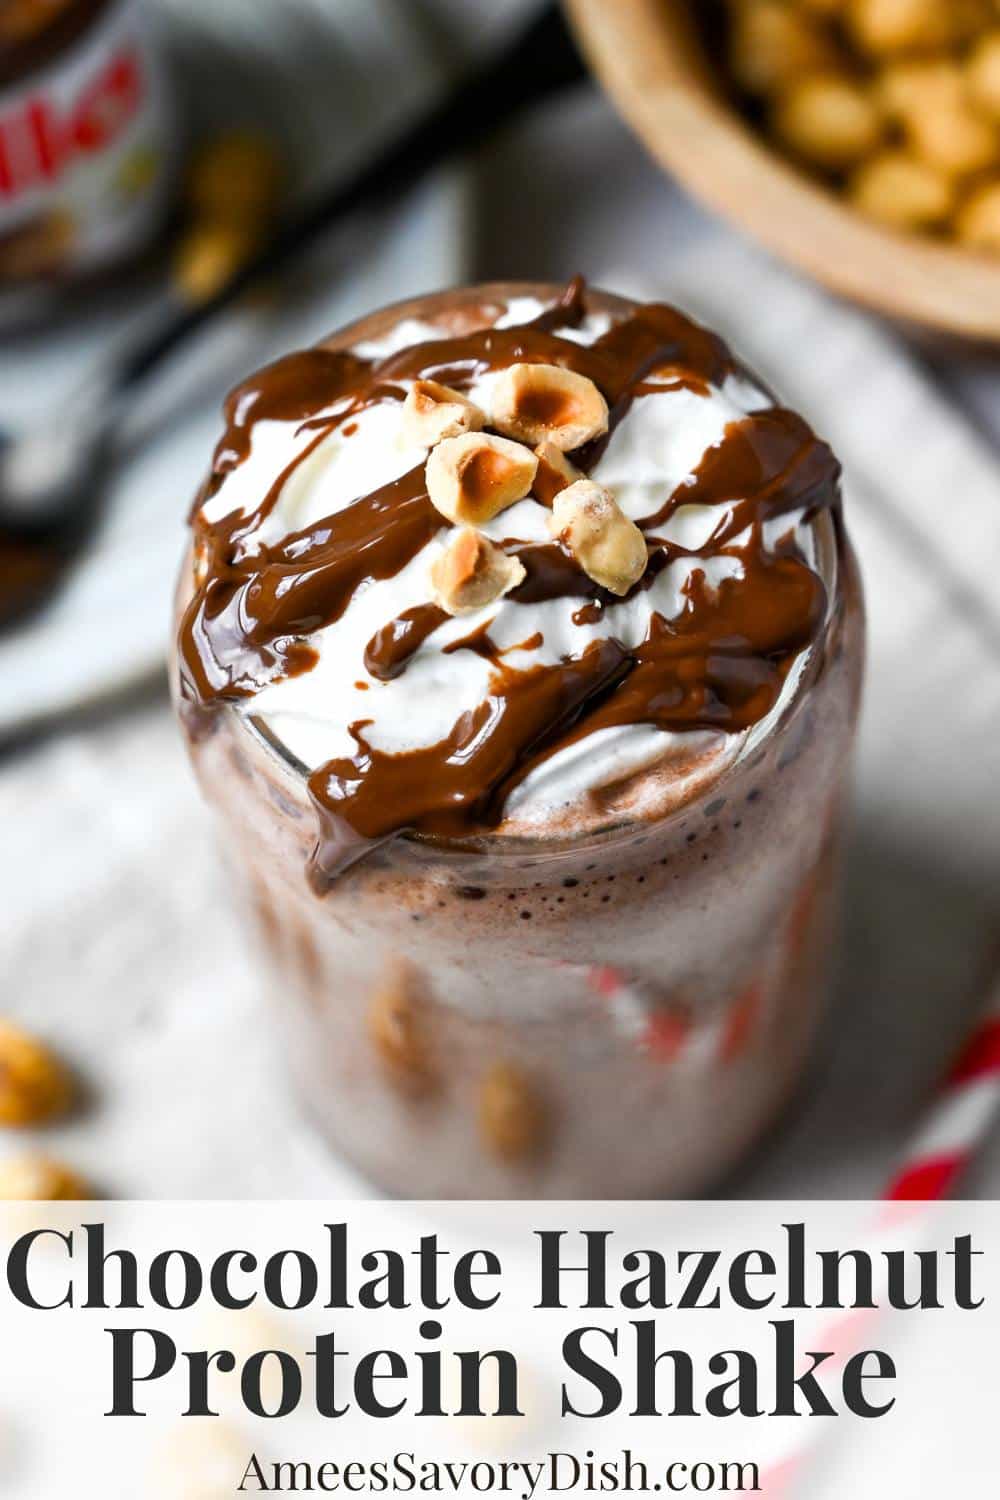 Craving Nutella?! Try this nutrient-dense hazelnut protein shake recipe with whey protein, cocoa, and lightly toasted hazelnuts. via @Ameessavorydish